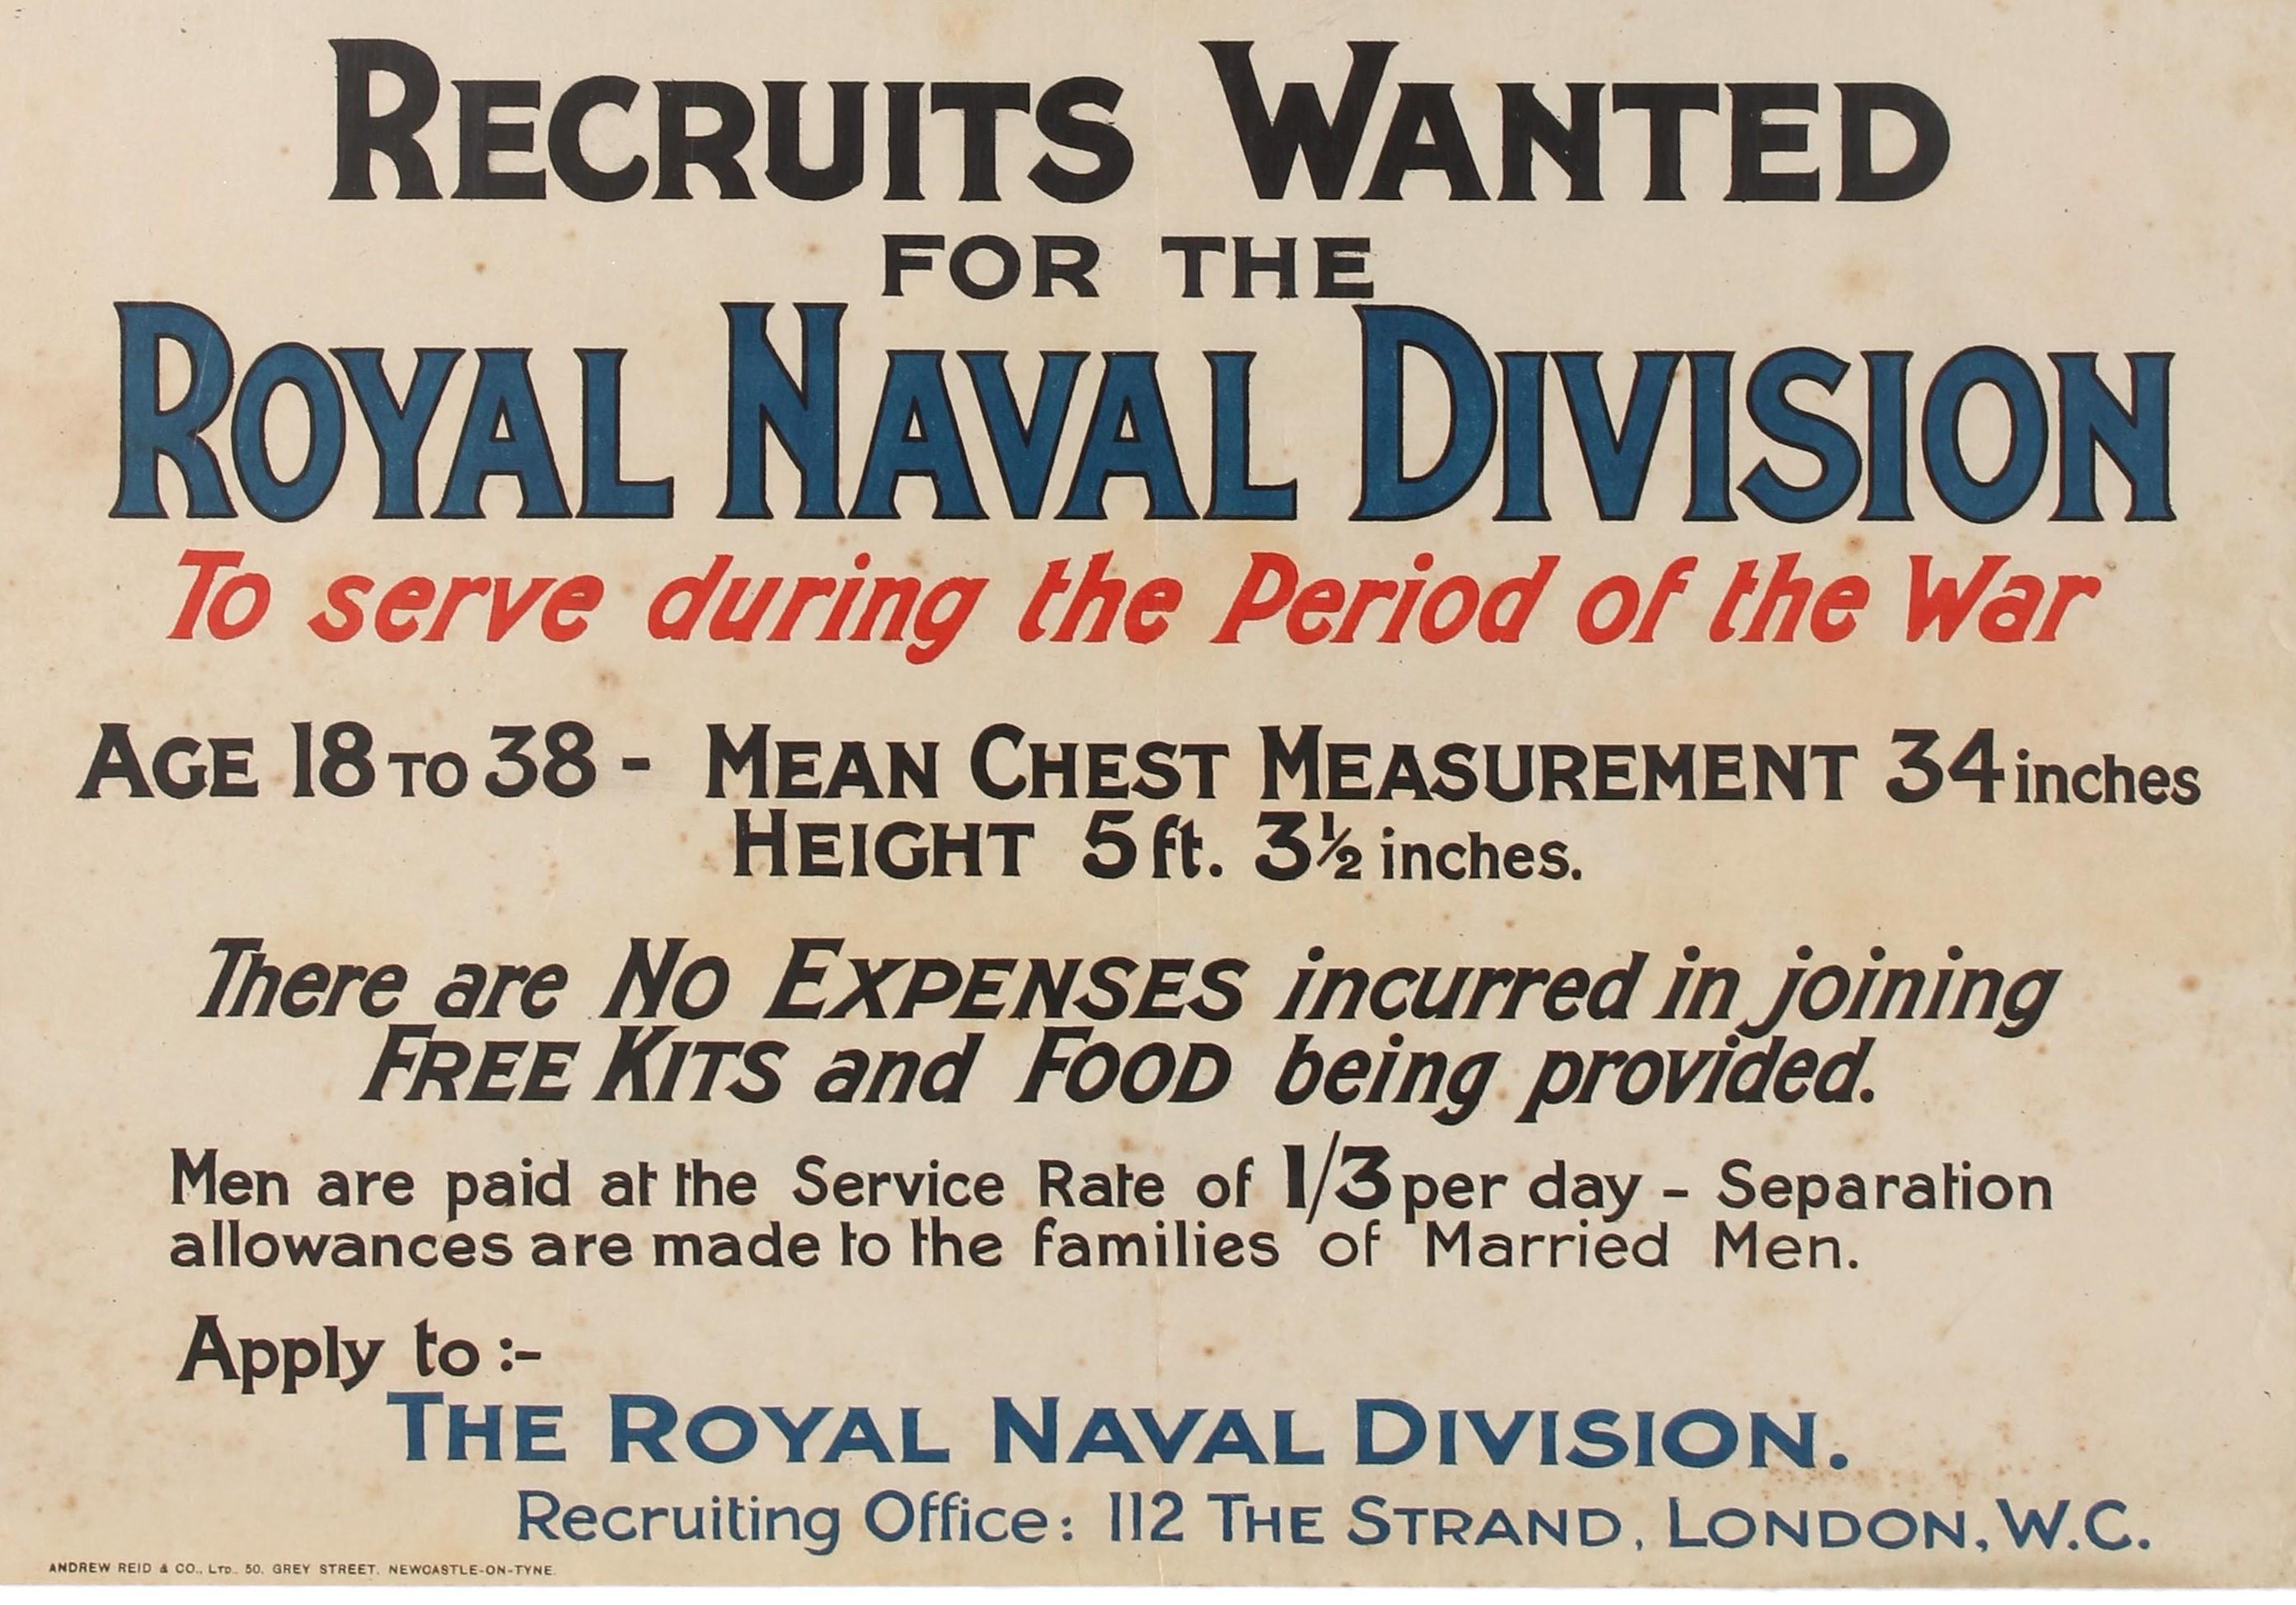 British Original Antique WWI Royal Navy Recruitment Poster England Expects HMS Victory